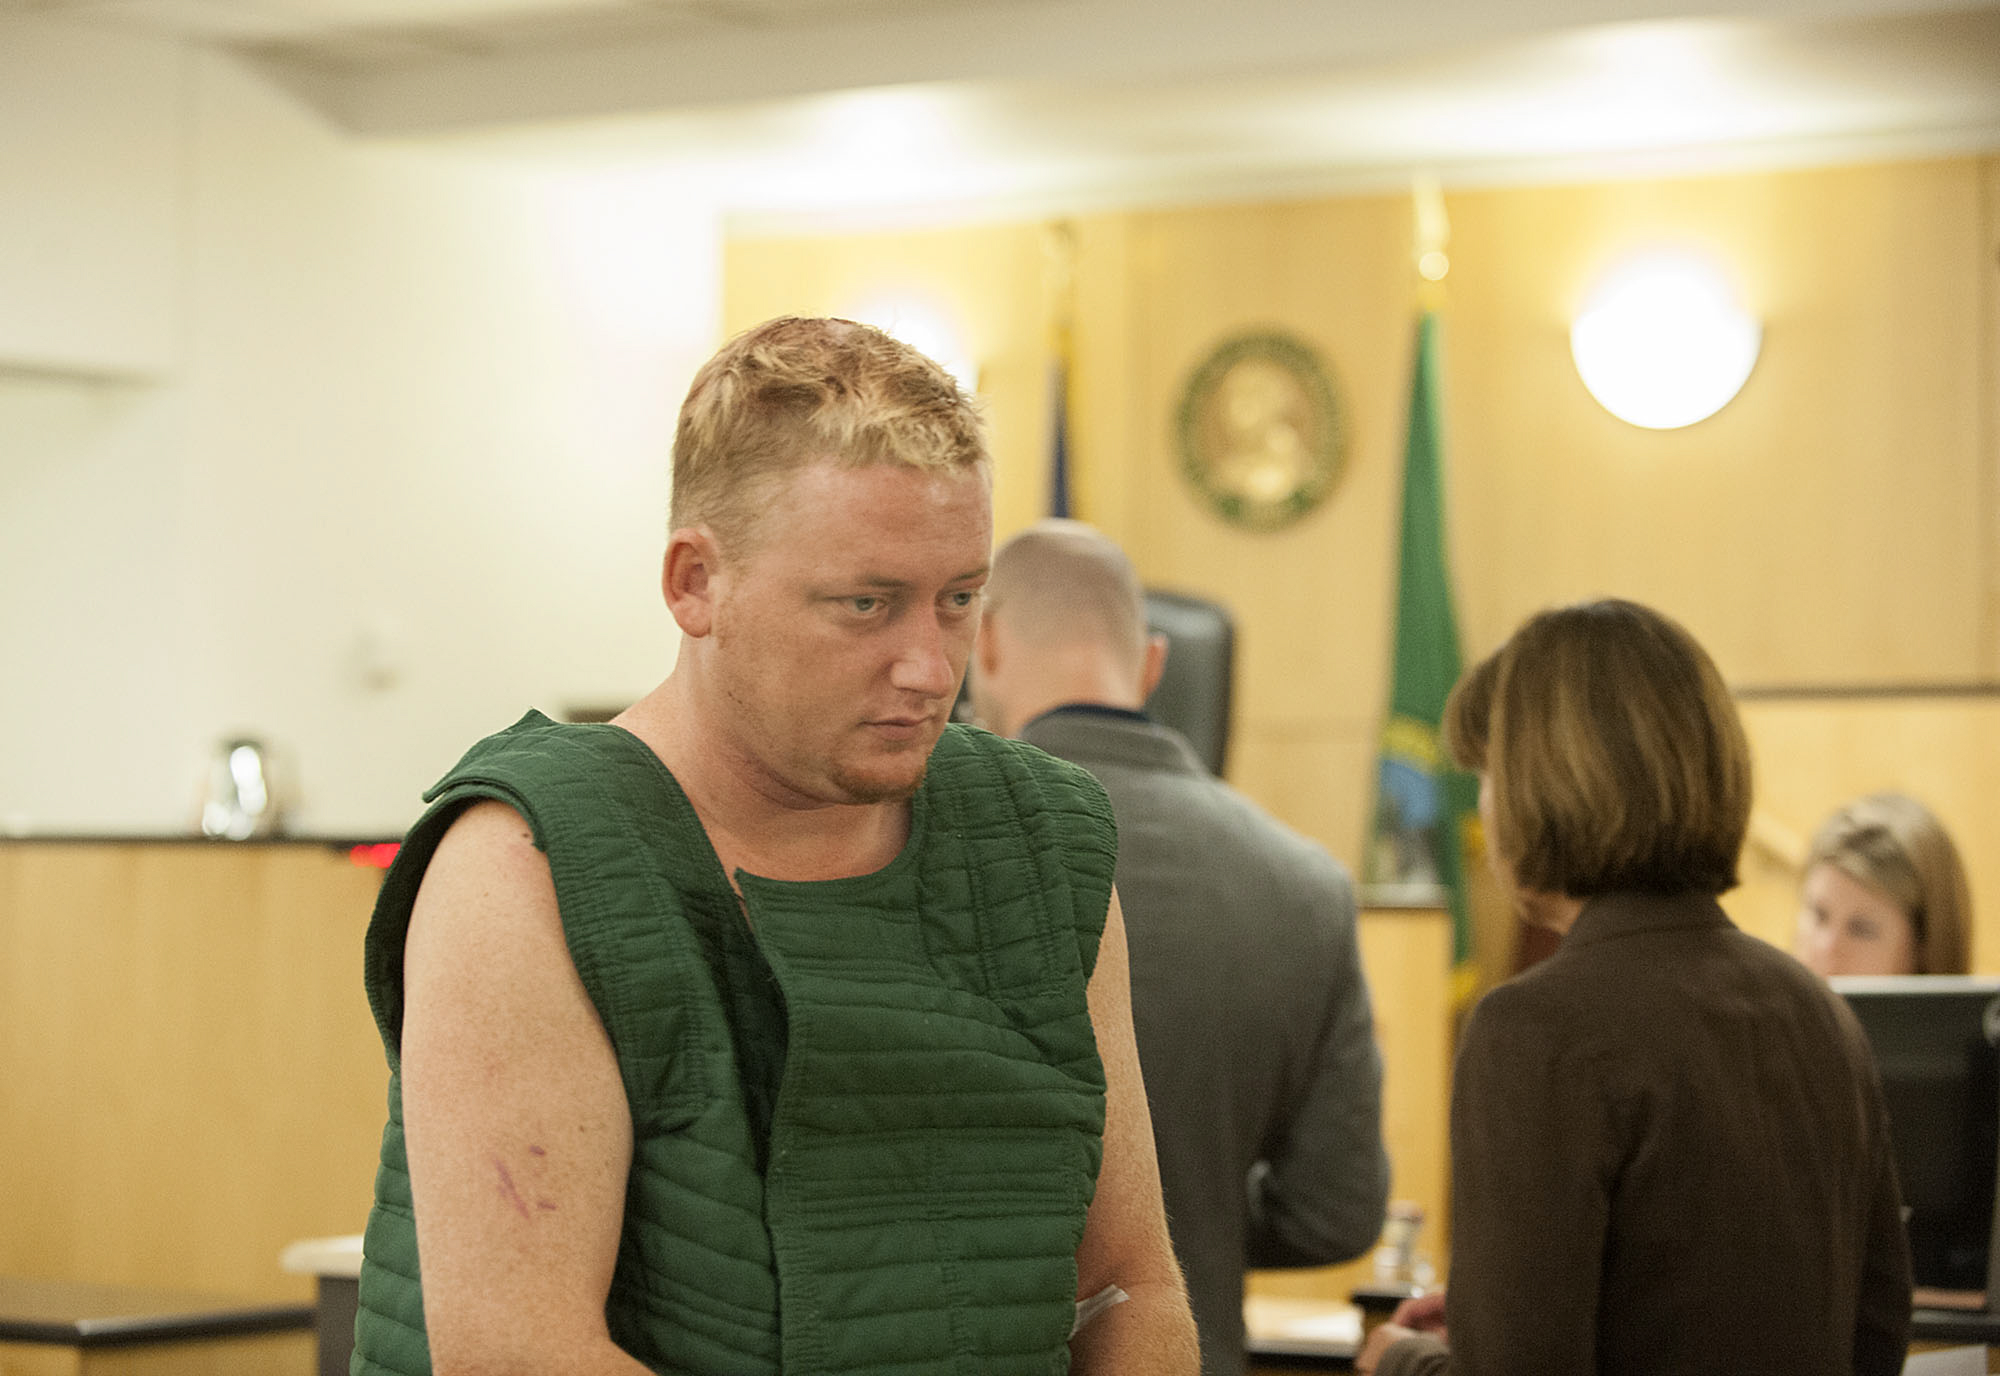 Kyle Holder makes a first appearance June 29 in Clark County Superior Court after he allegedly beat his 2-year-old daughter at a Salmon Creek motel, leaving her in critical condition. Holder was ordered Friday to undergo 90 days of mental health treatment before his case can continue.